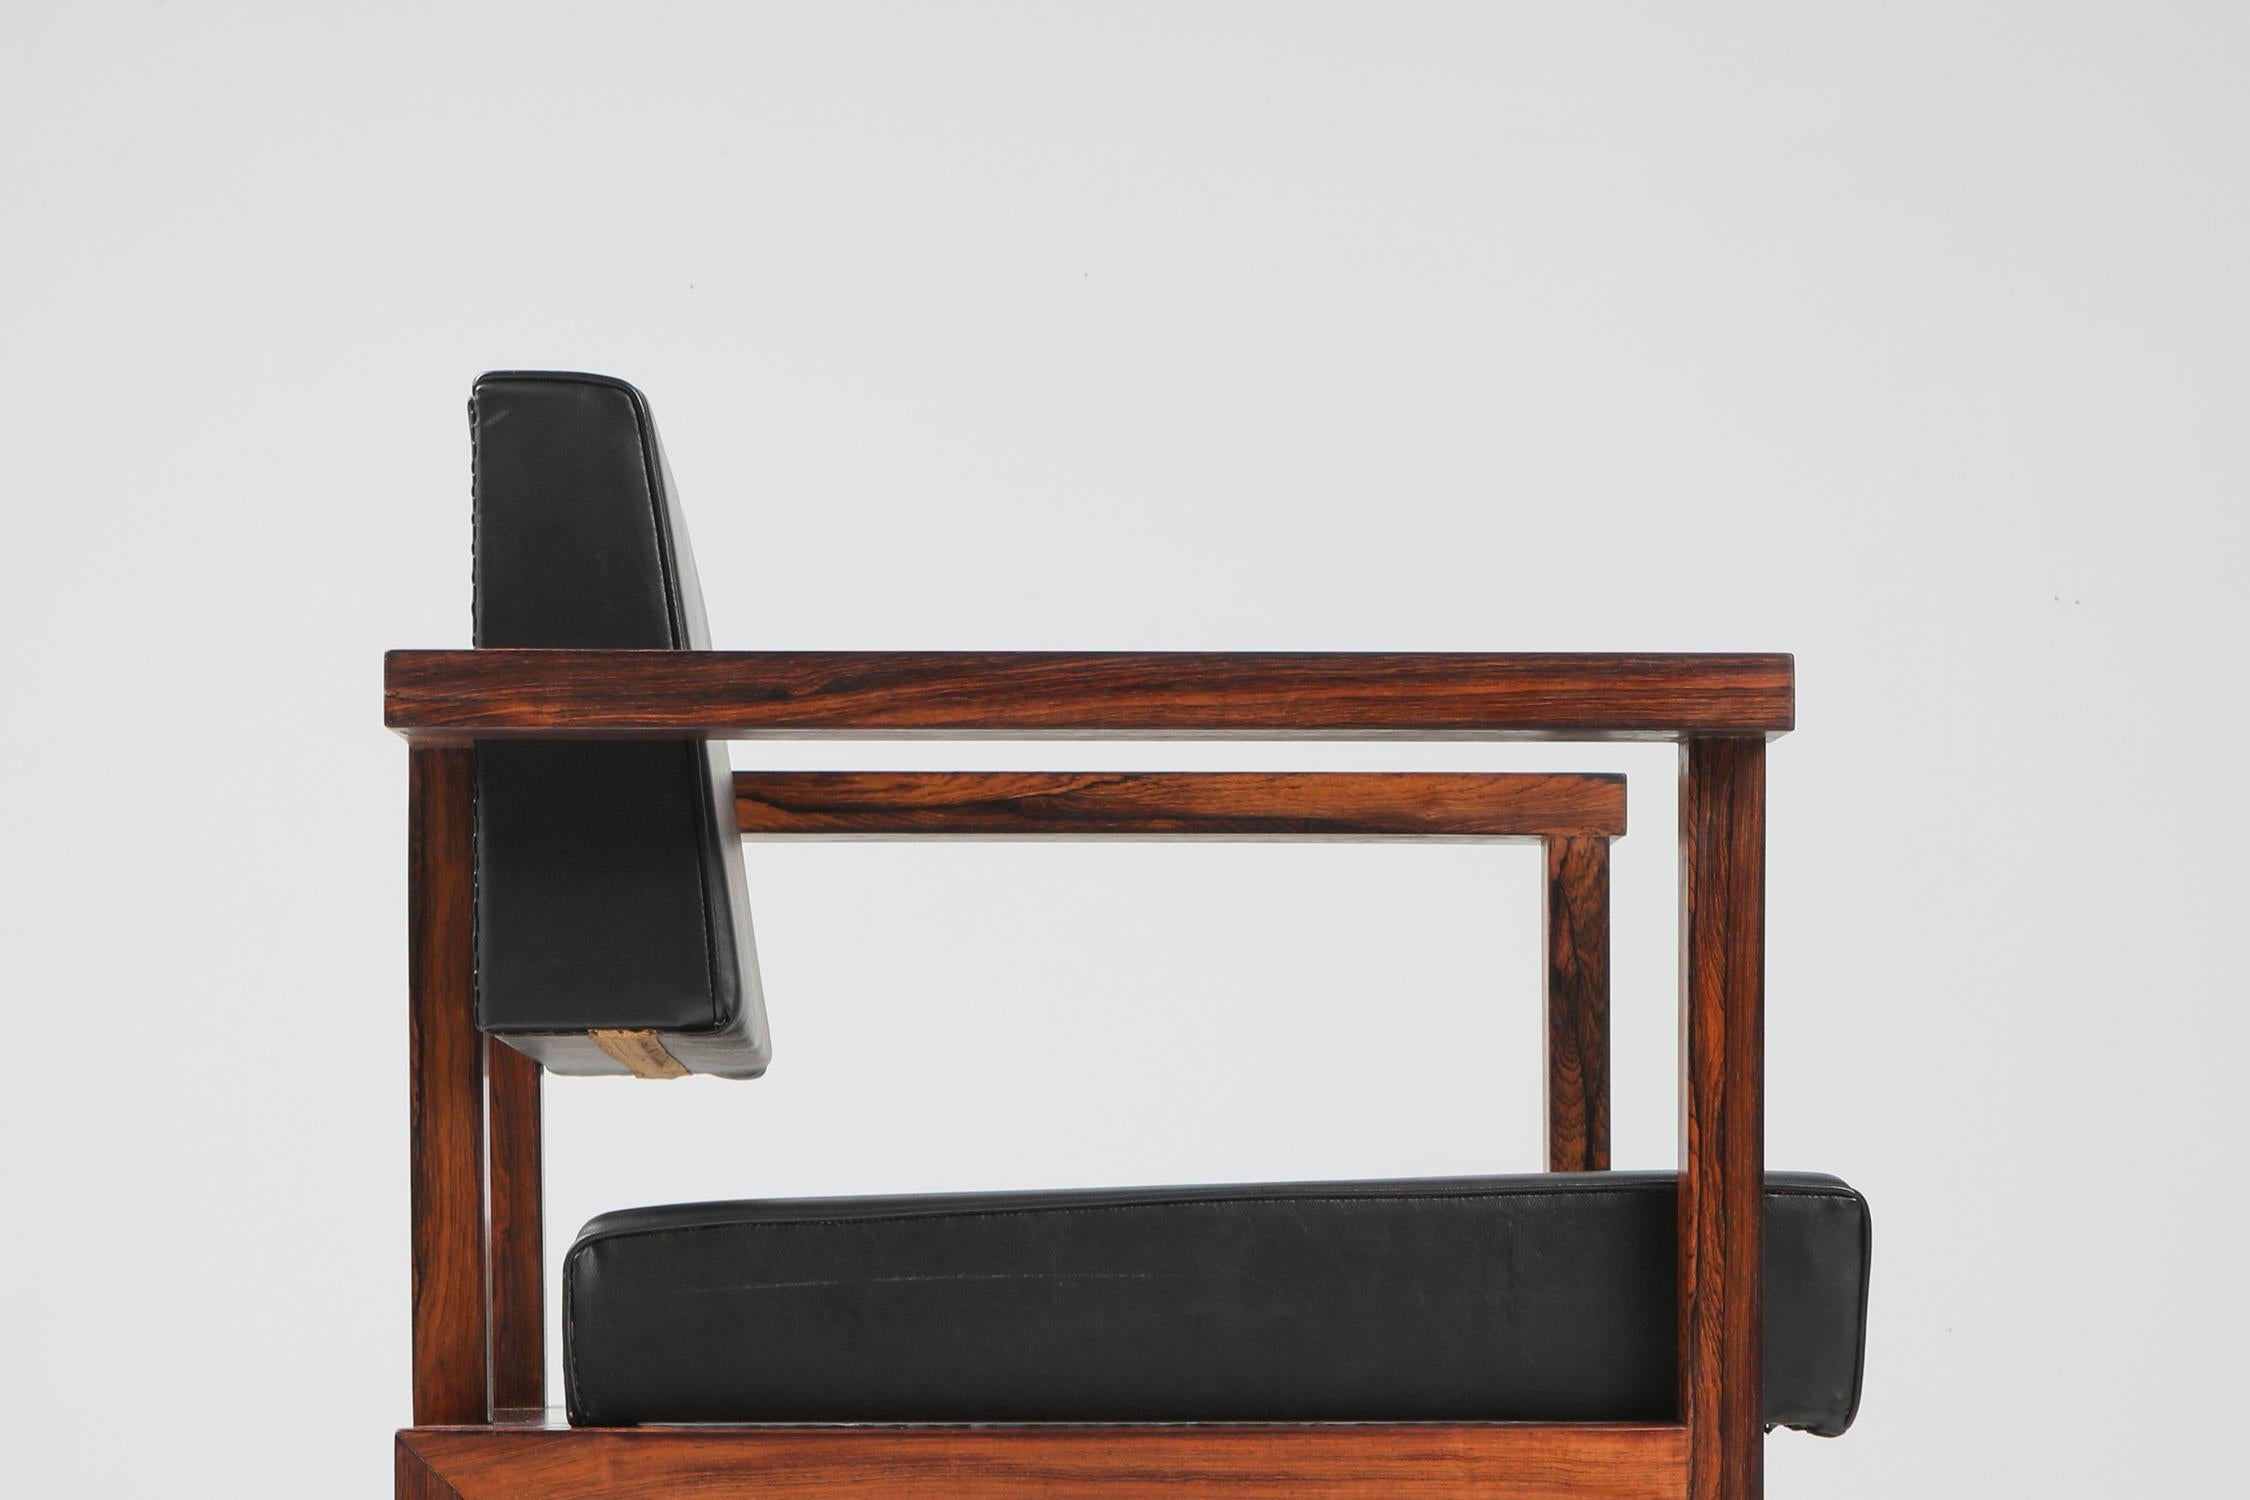 Wim Den Boon Executive Chairs in Black Leather, 1950s For Sale 2